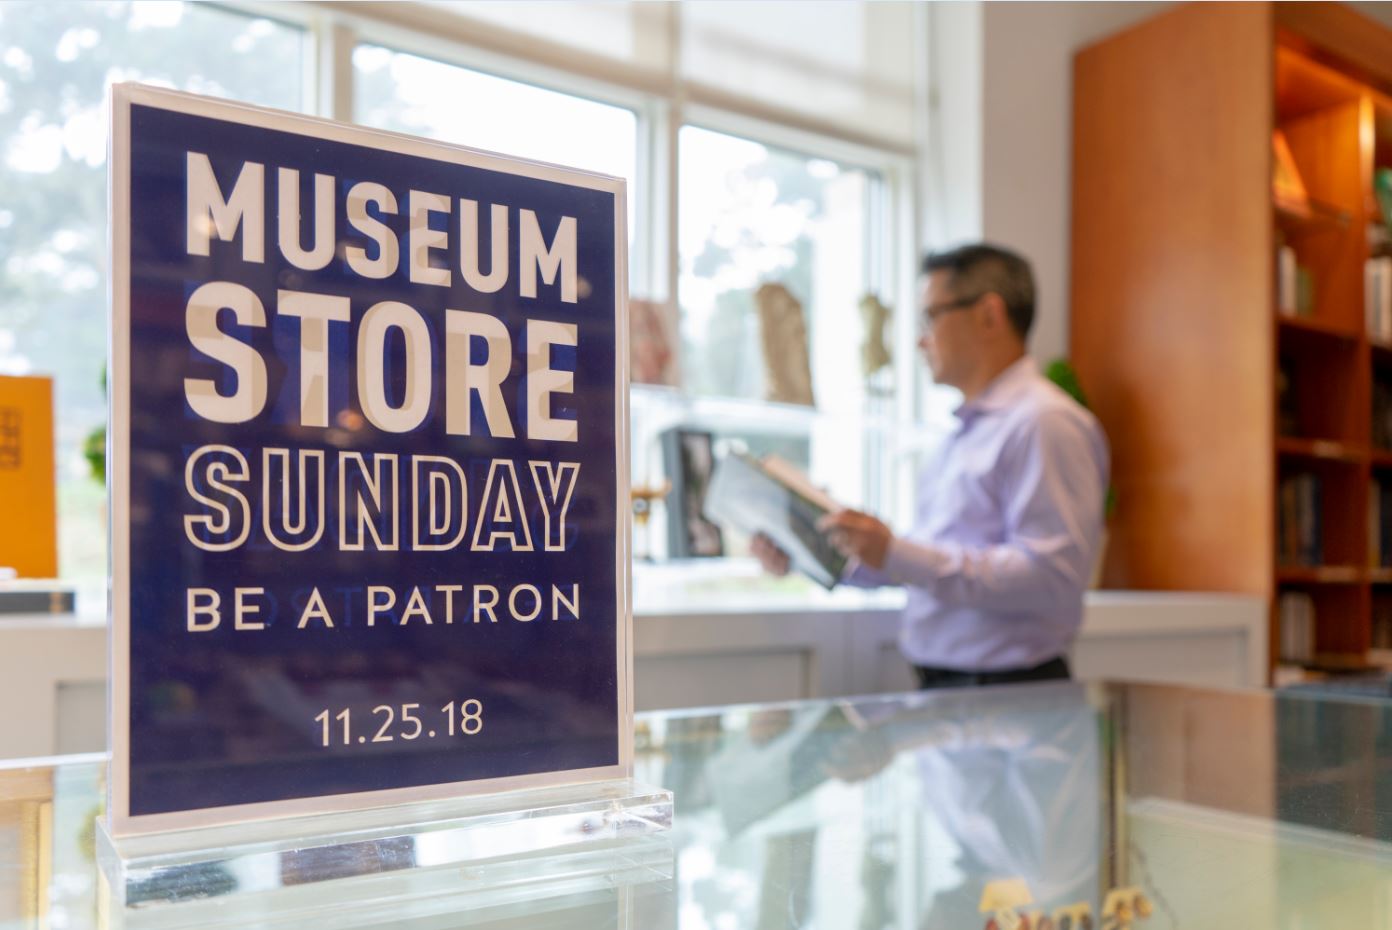 Museum Store Sunday poster